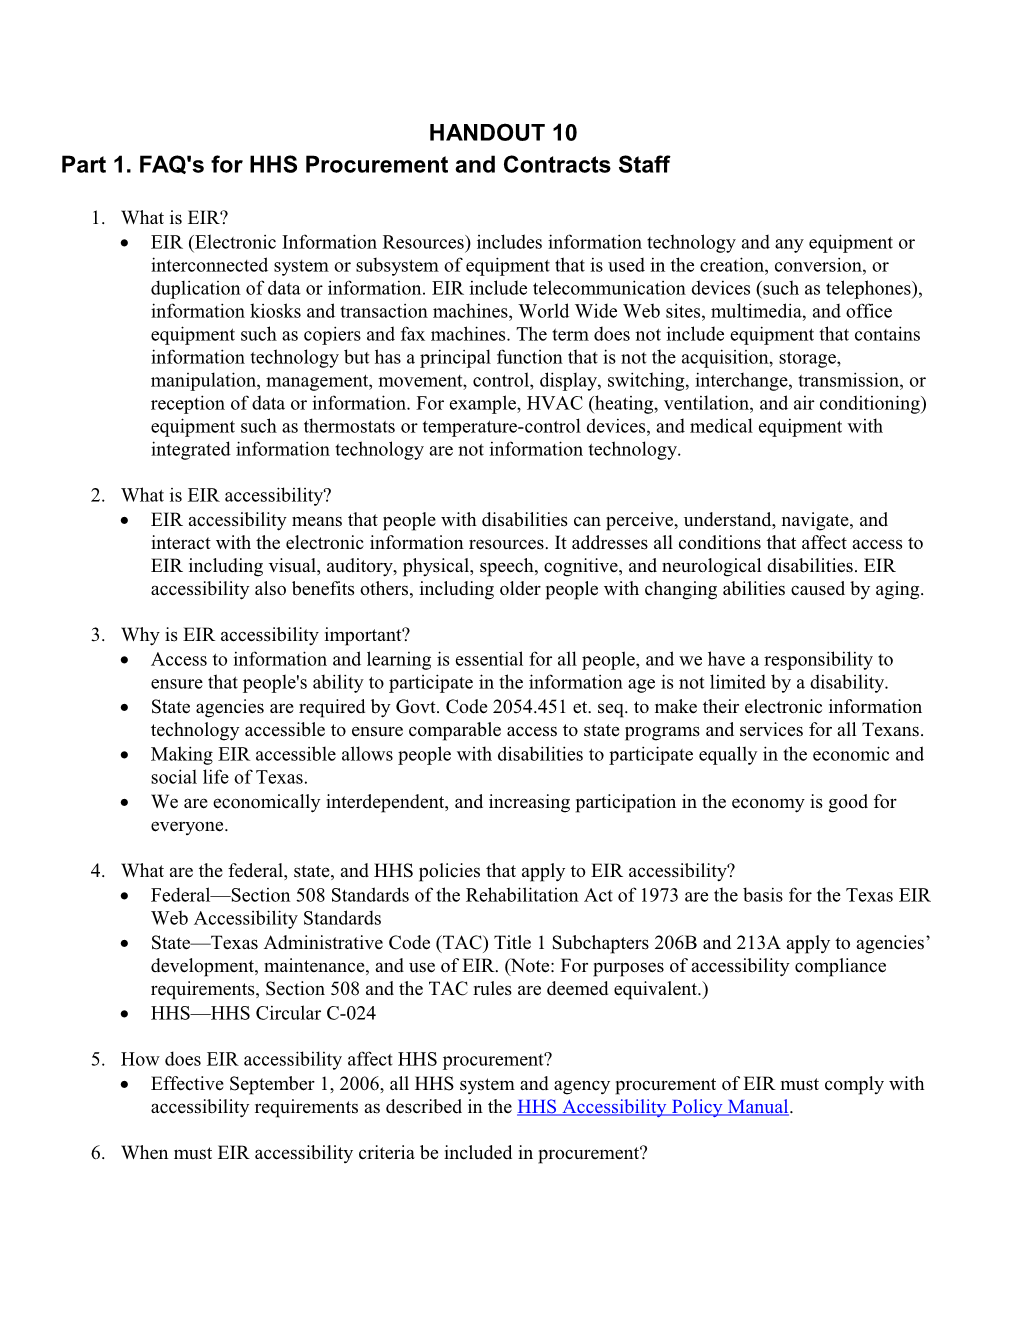 HHS Procurement and Contracts Staff FAQ